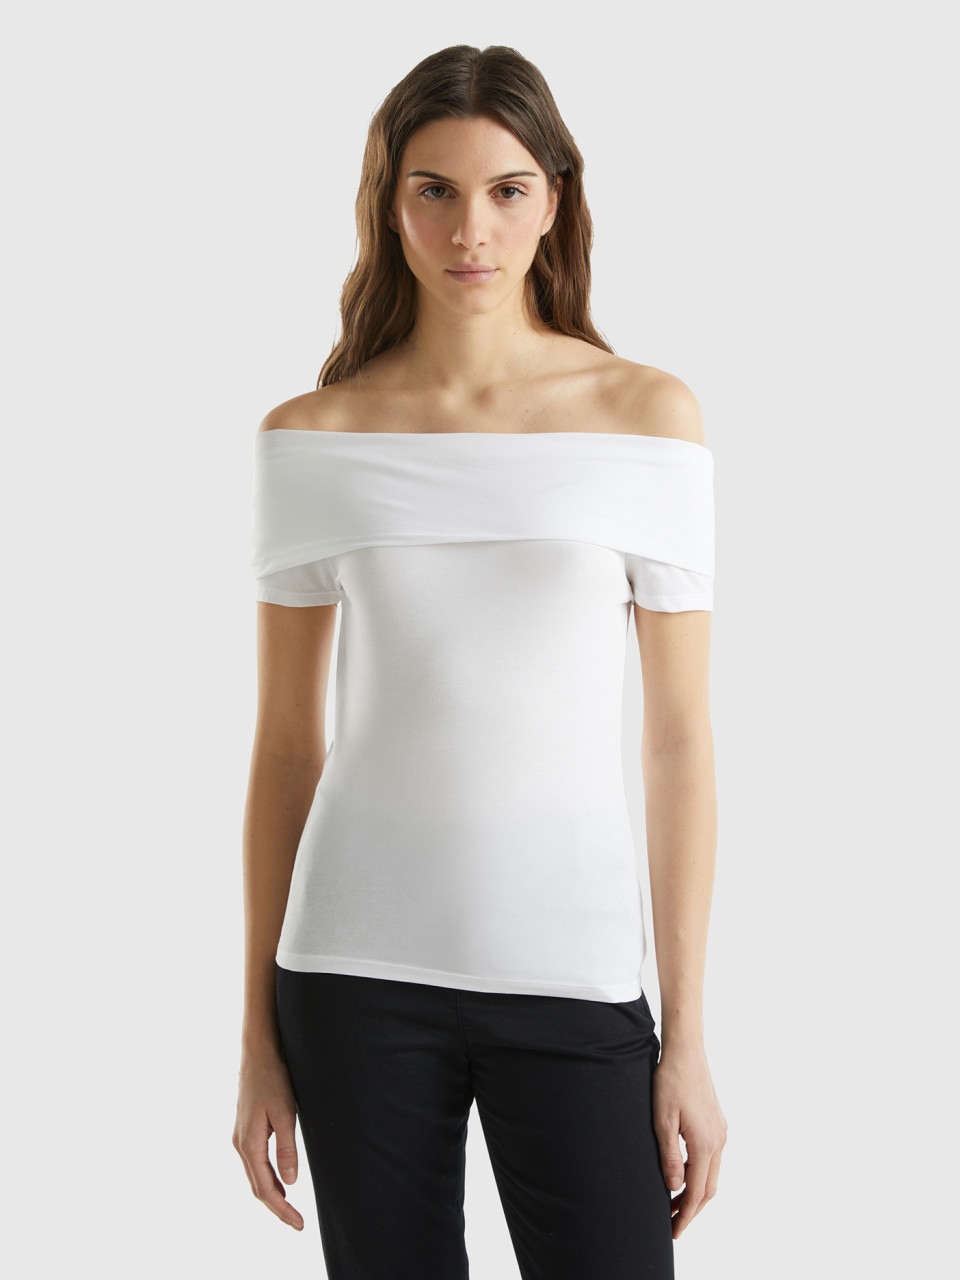 Benetton, Slim-fit T-shirt With Bare Shoulders, White, Women